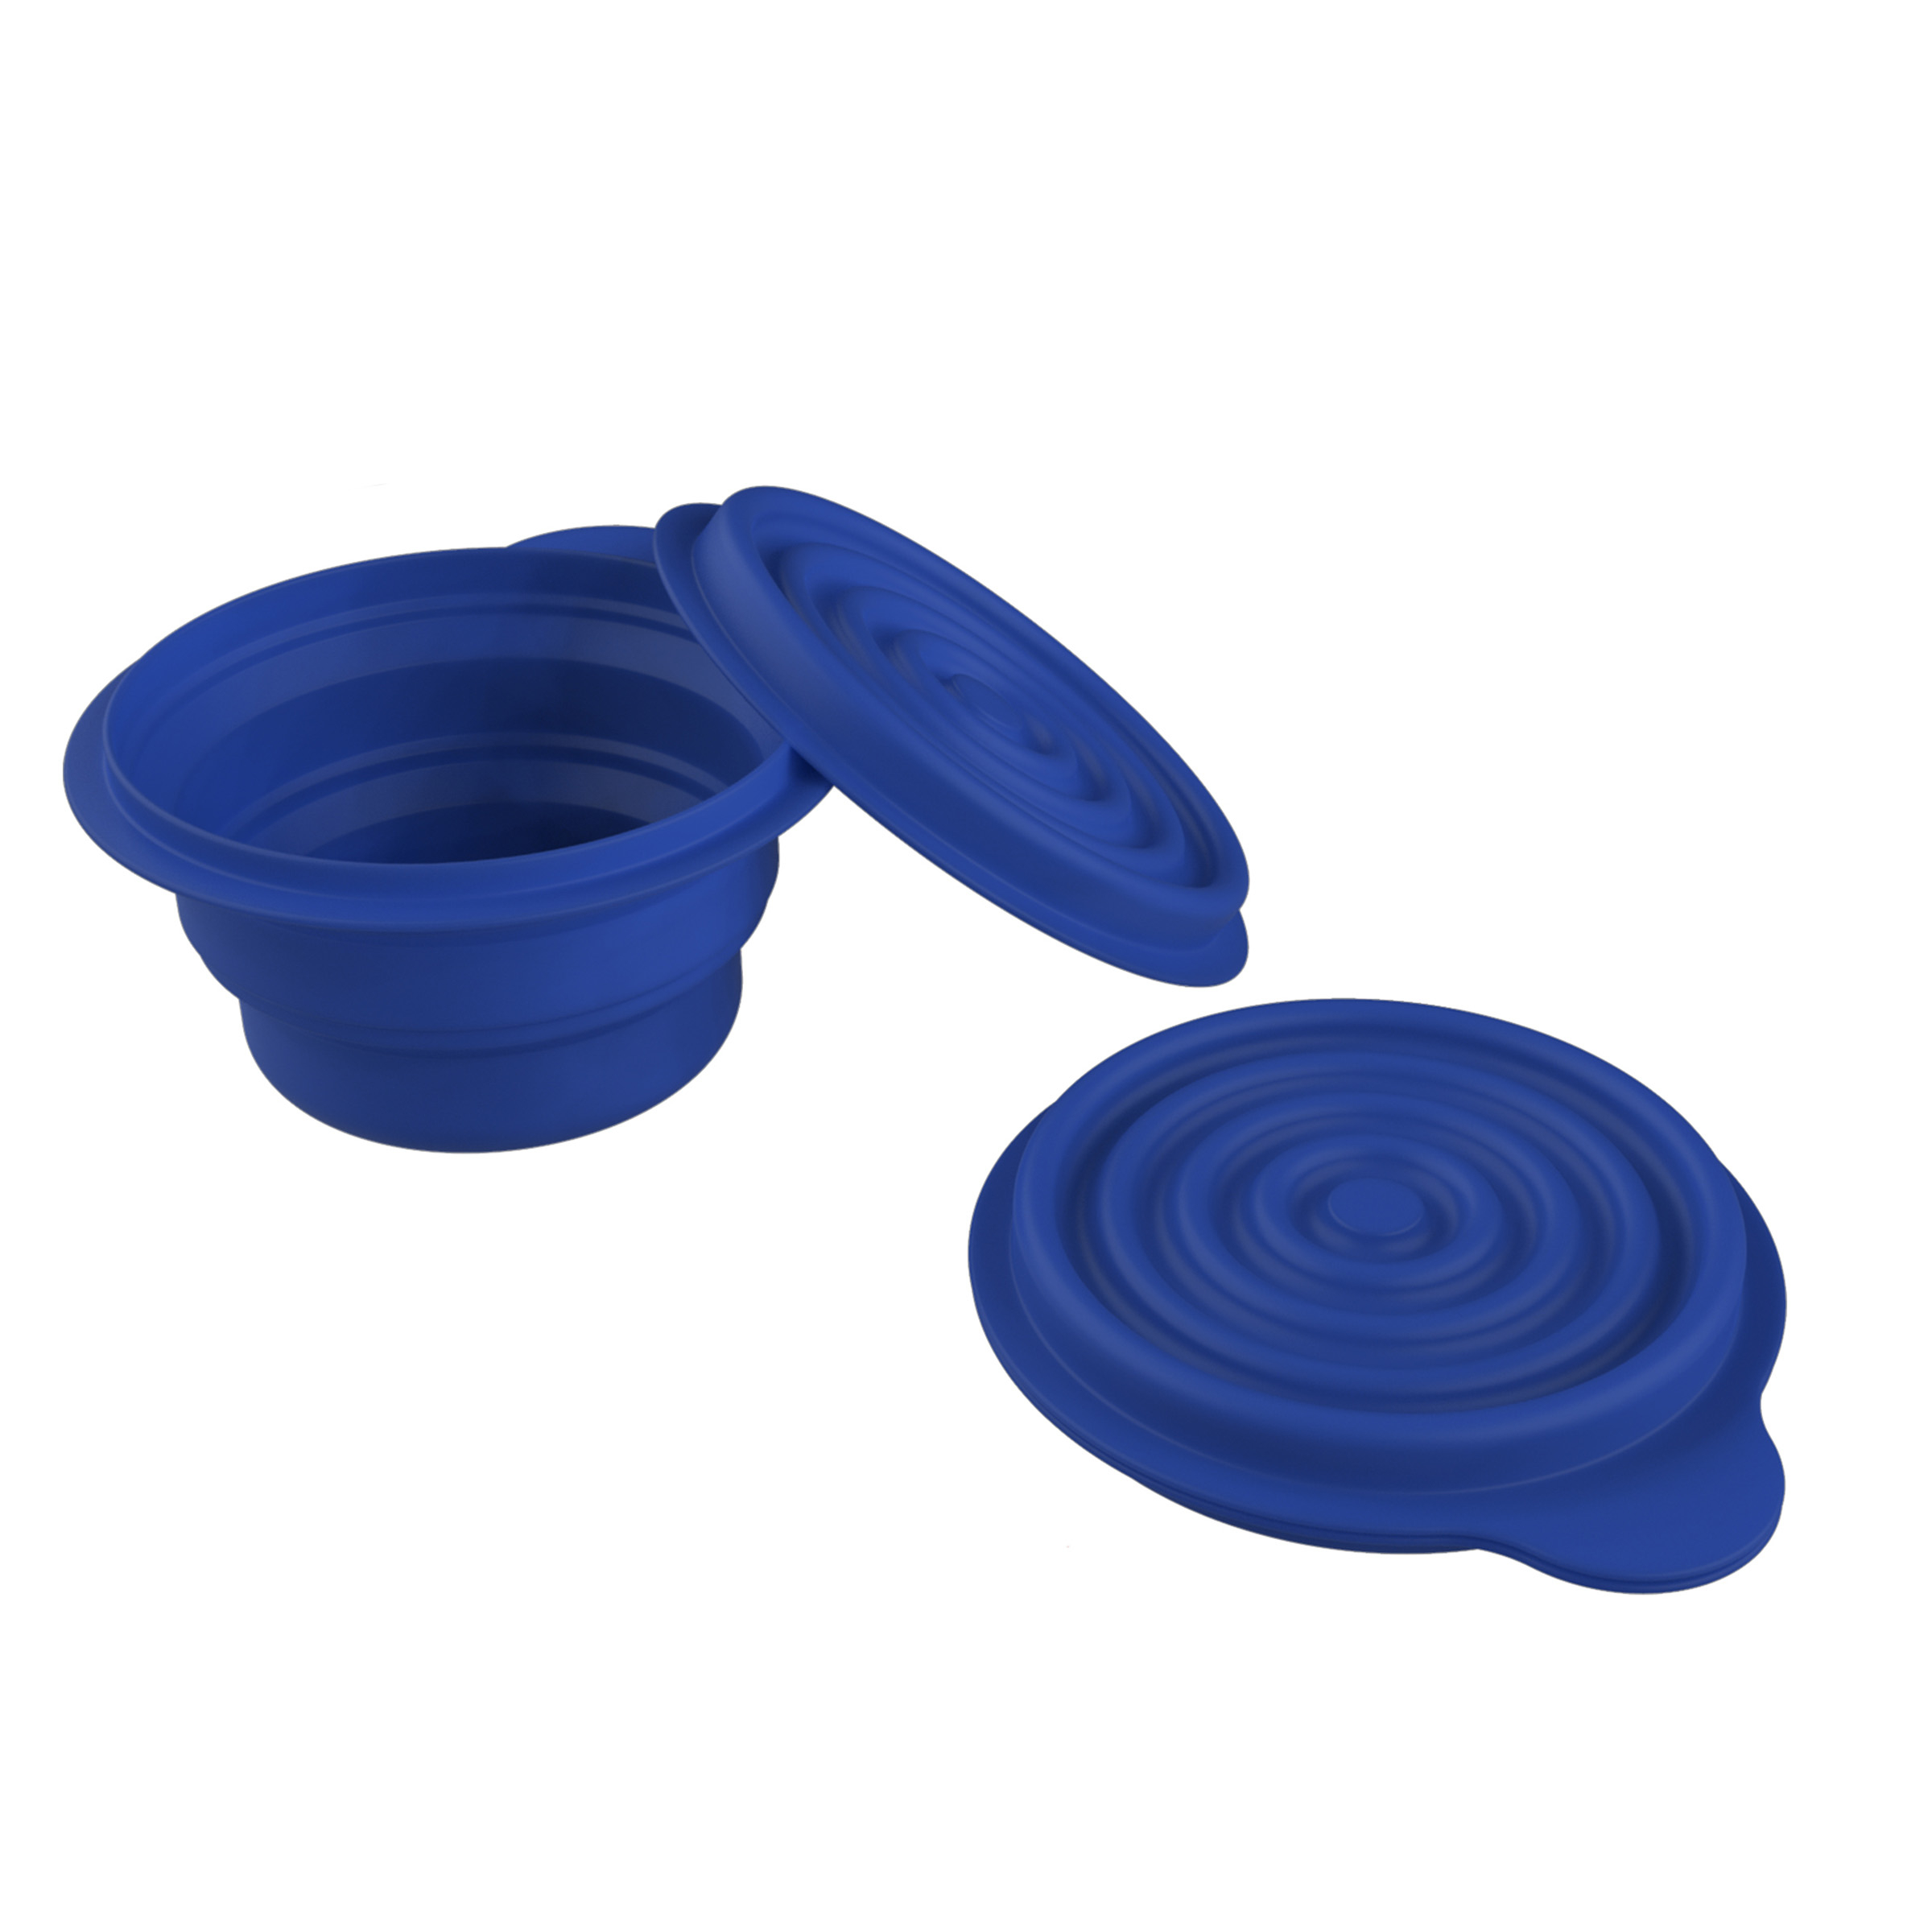 Collapsible Bowls Travel Hiking Camping BPA Free Easy Carry With Lids Set Of 2 Containers With Lids - Blue